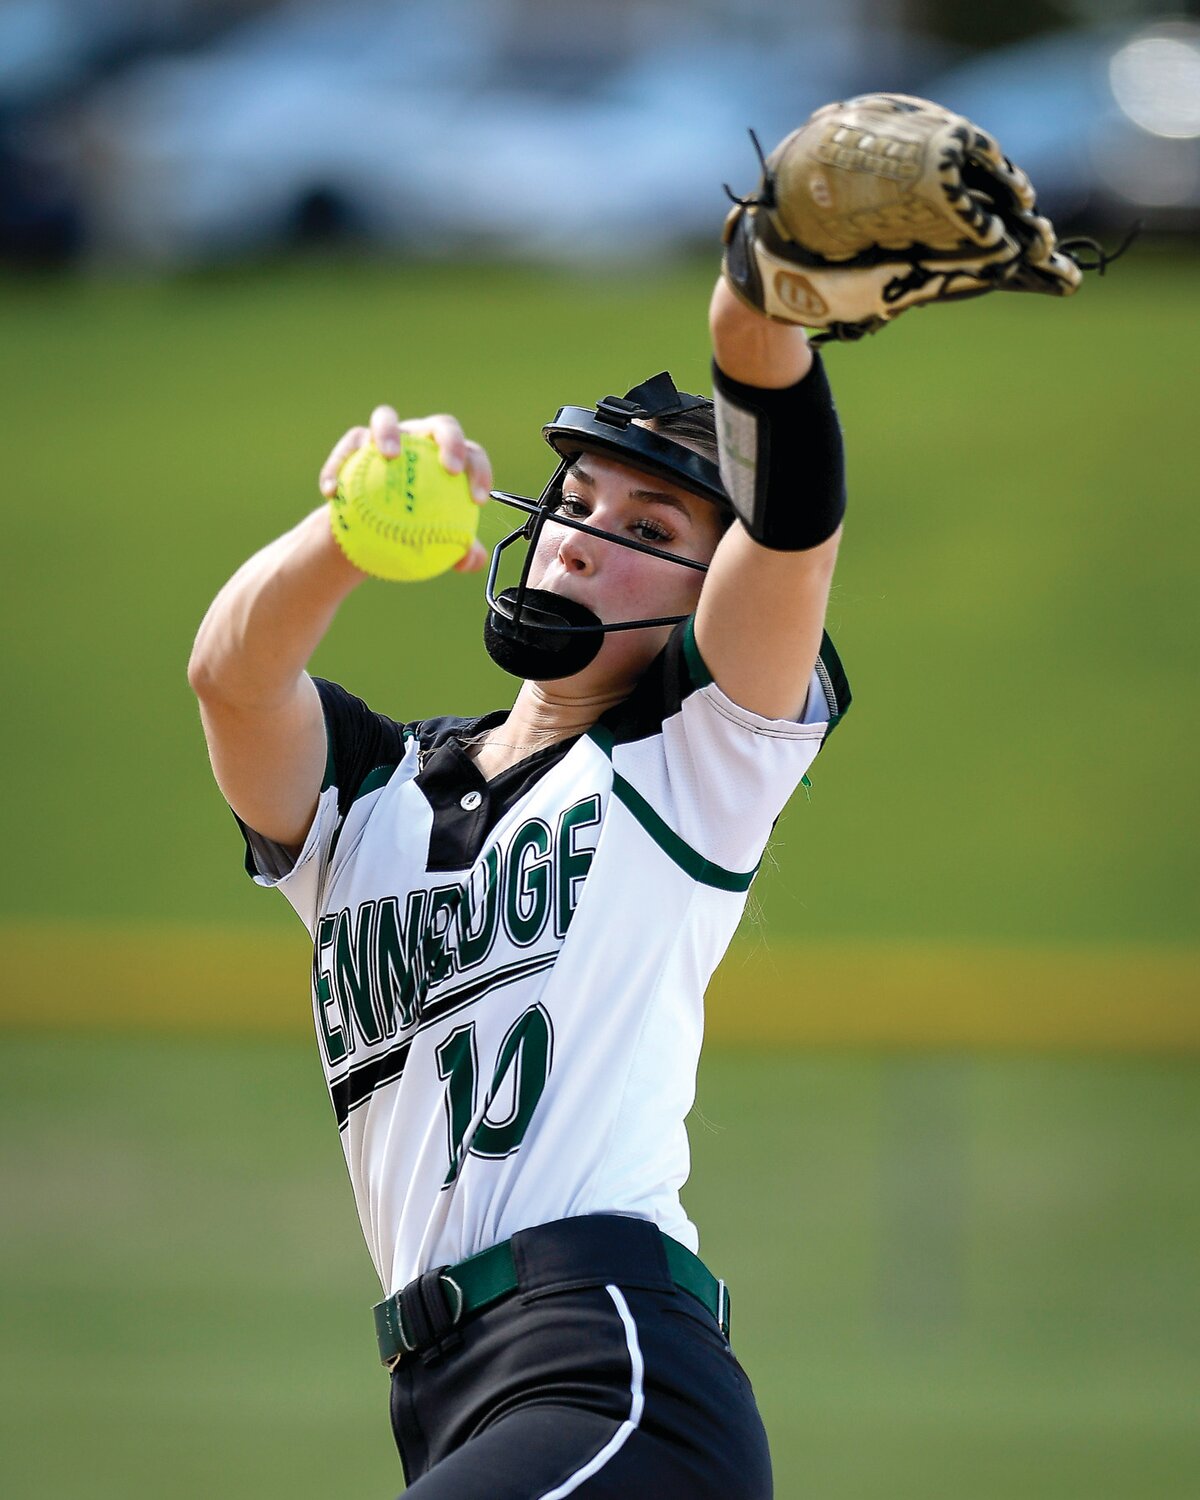 Pennridge pitcher Grace Helbling recorded 19 strikeouts in Monday’s game.